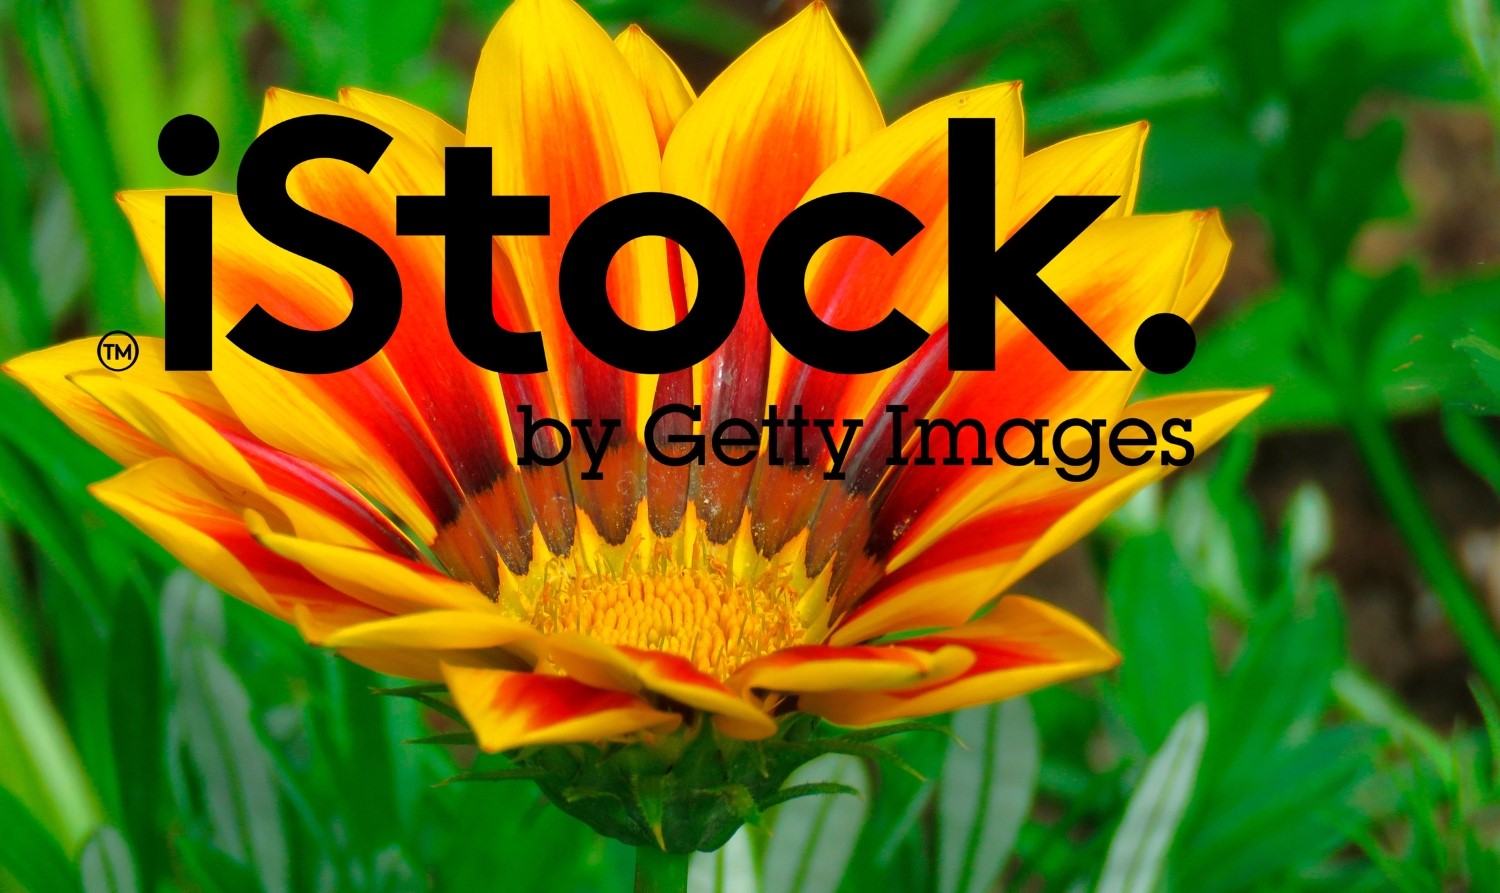 How To Download Istock Videos Without Watermark | Robots.net